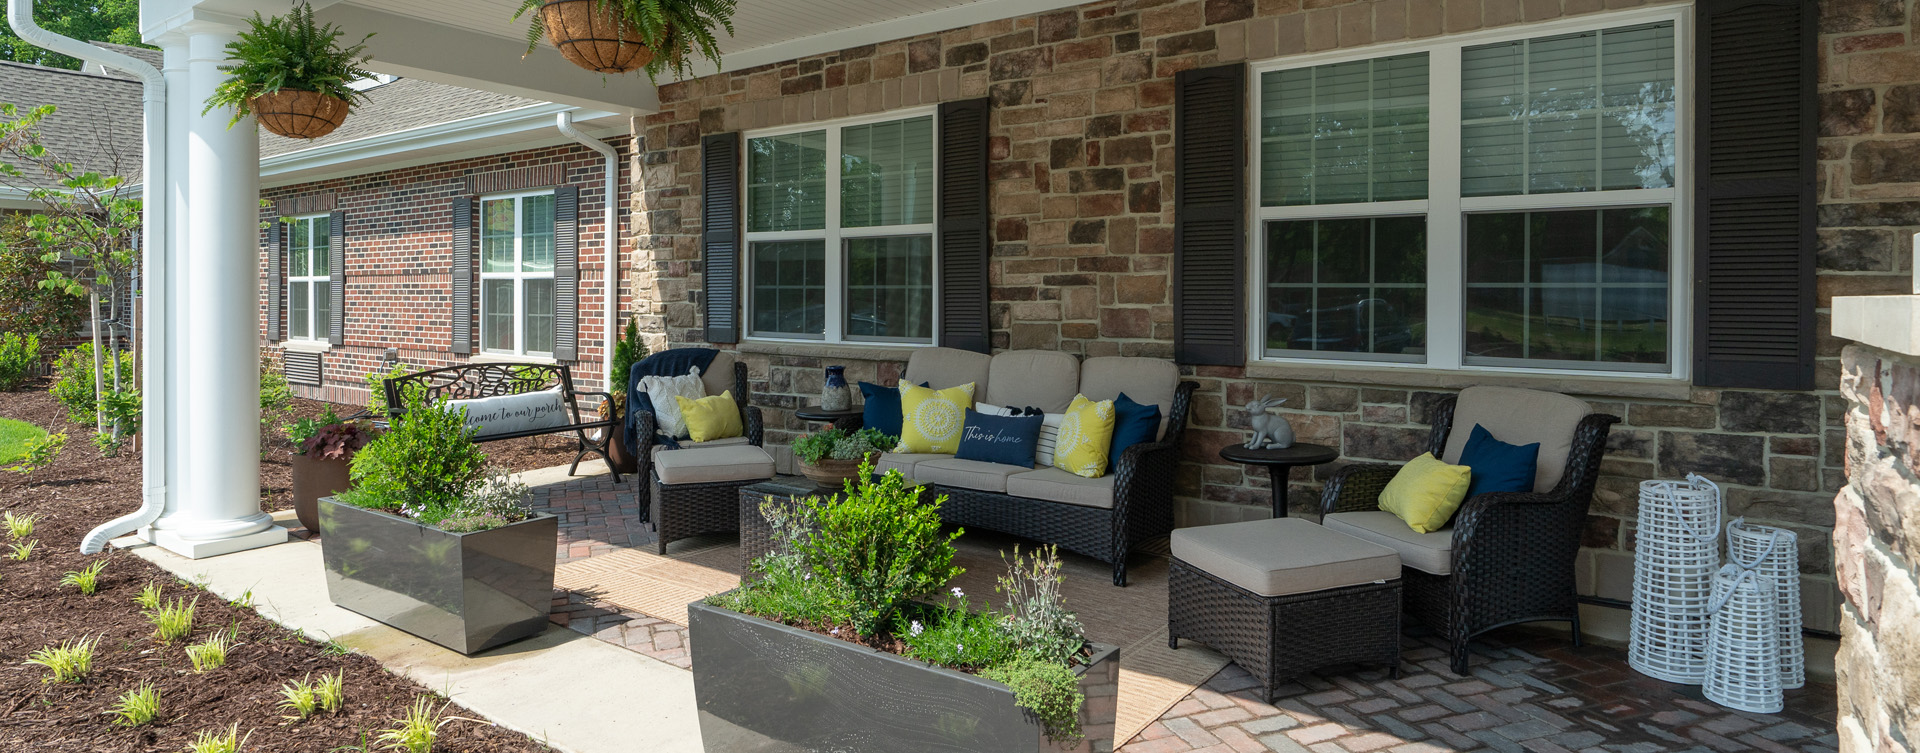 Enjoy conversations with friends on the porch at Bickford of Chesapeake